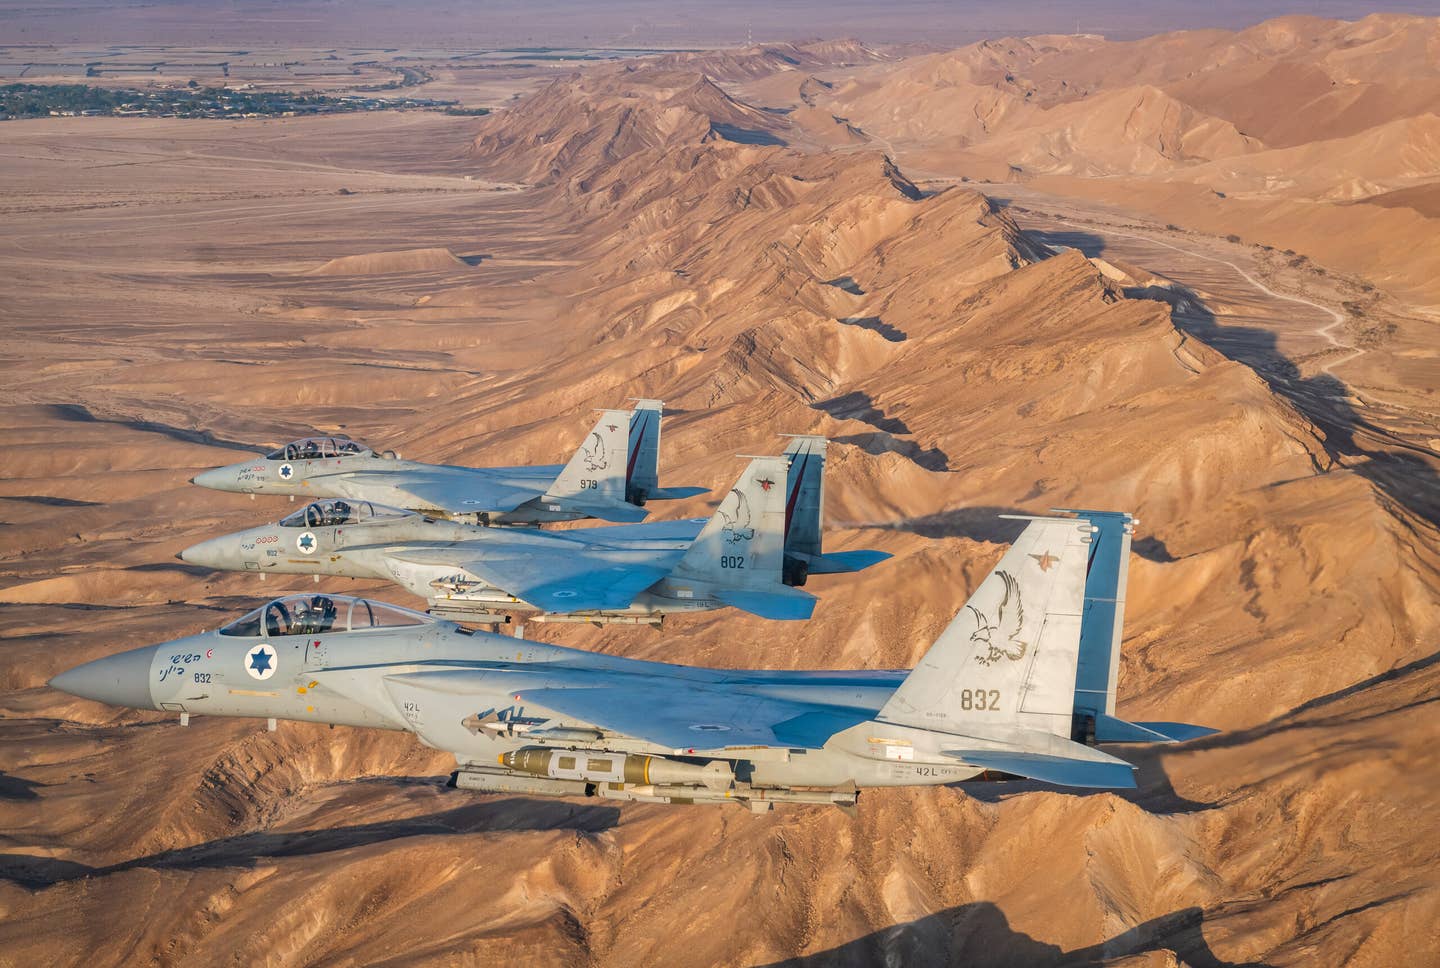 The three F-15 Baz jets in close formation, revealing the kill marks worn on each. <em>Amit Agronov</em>